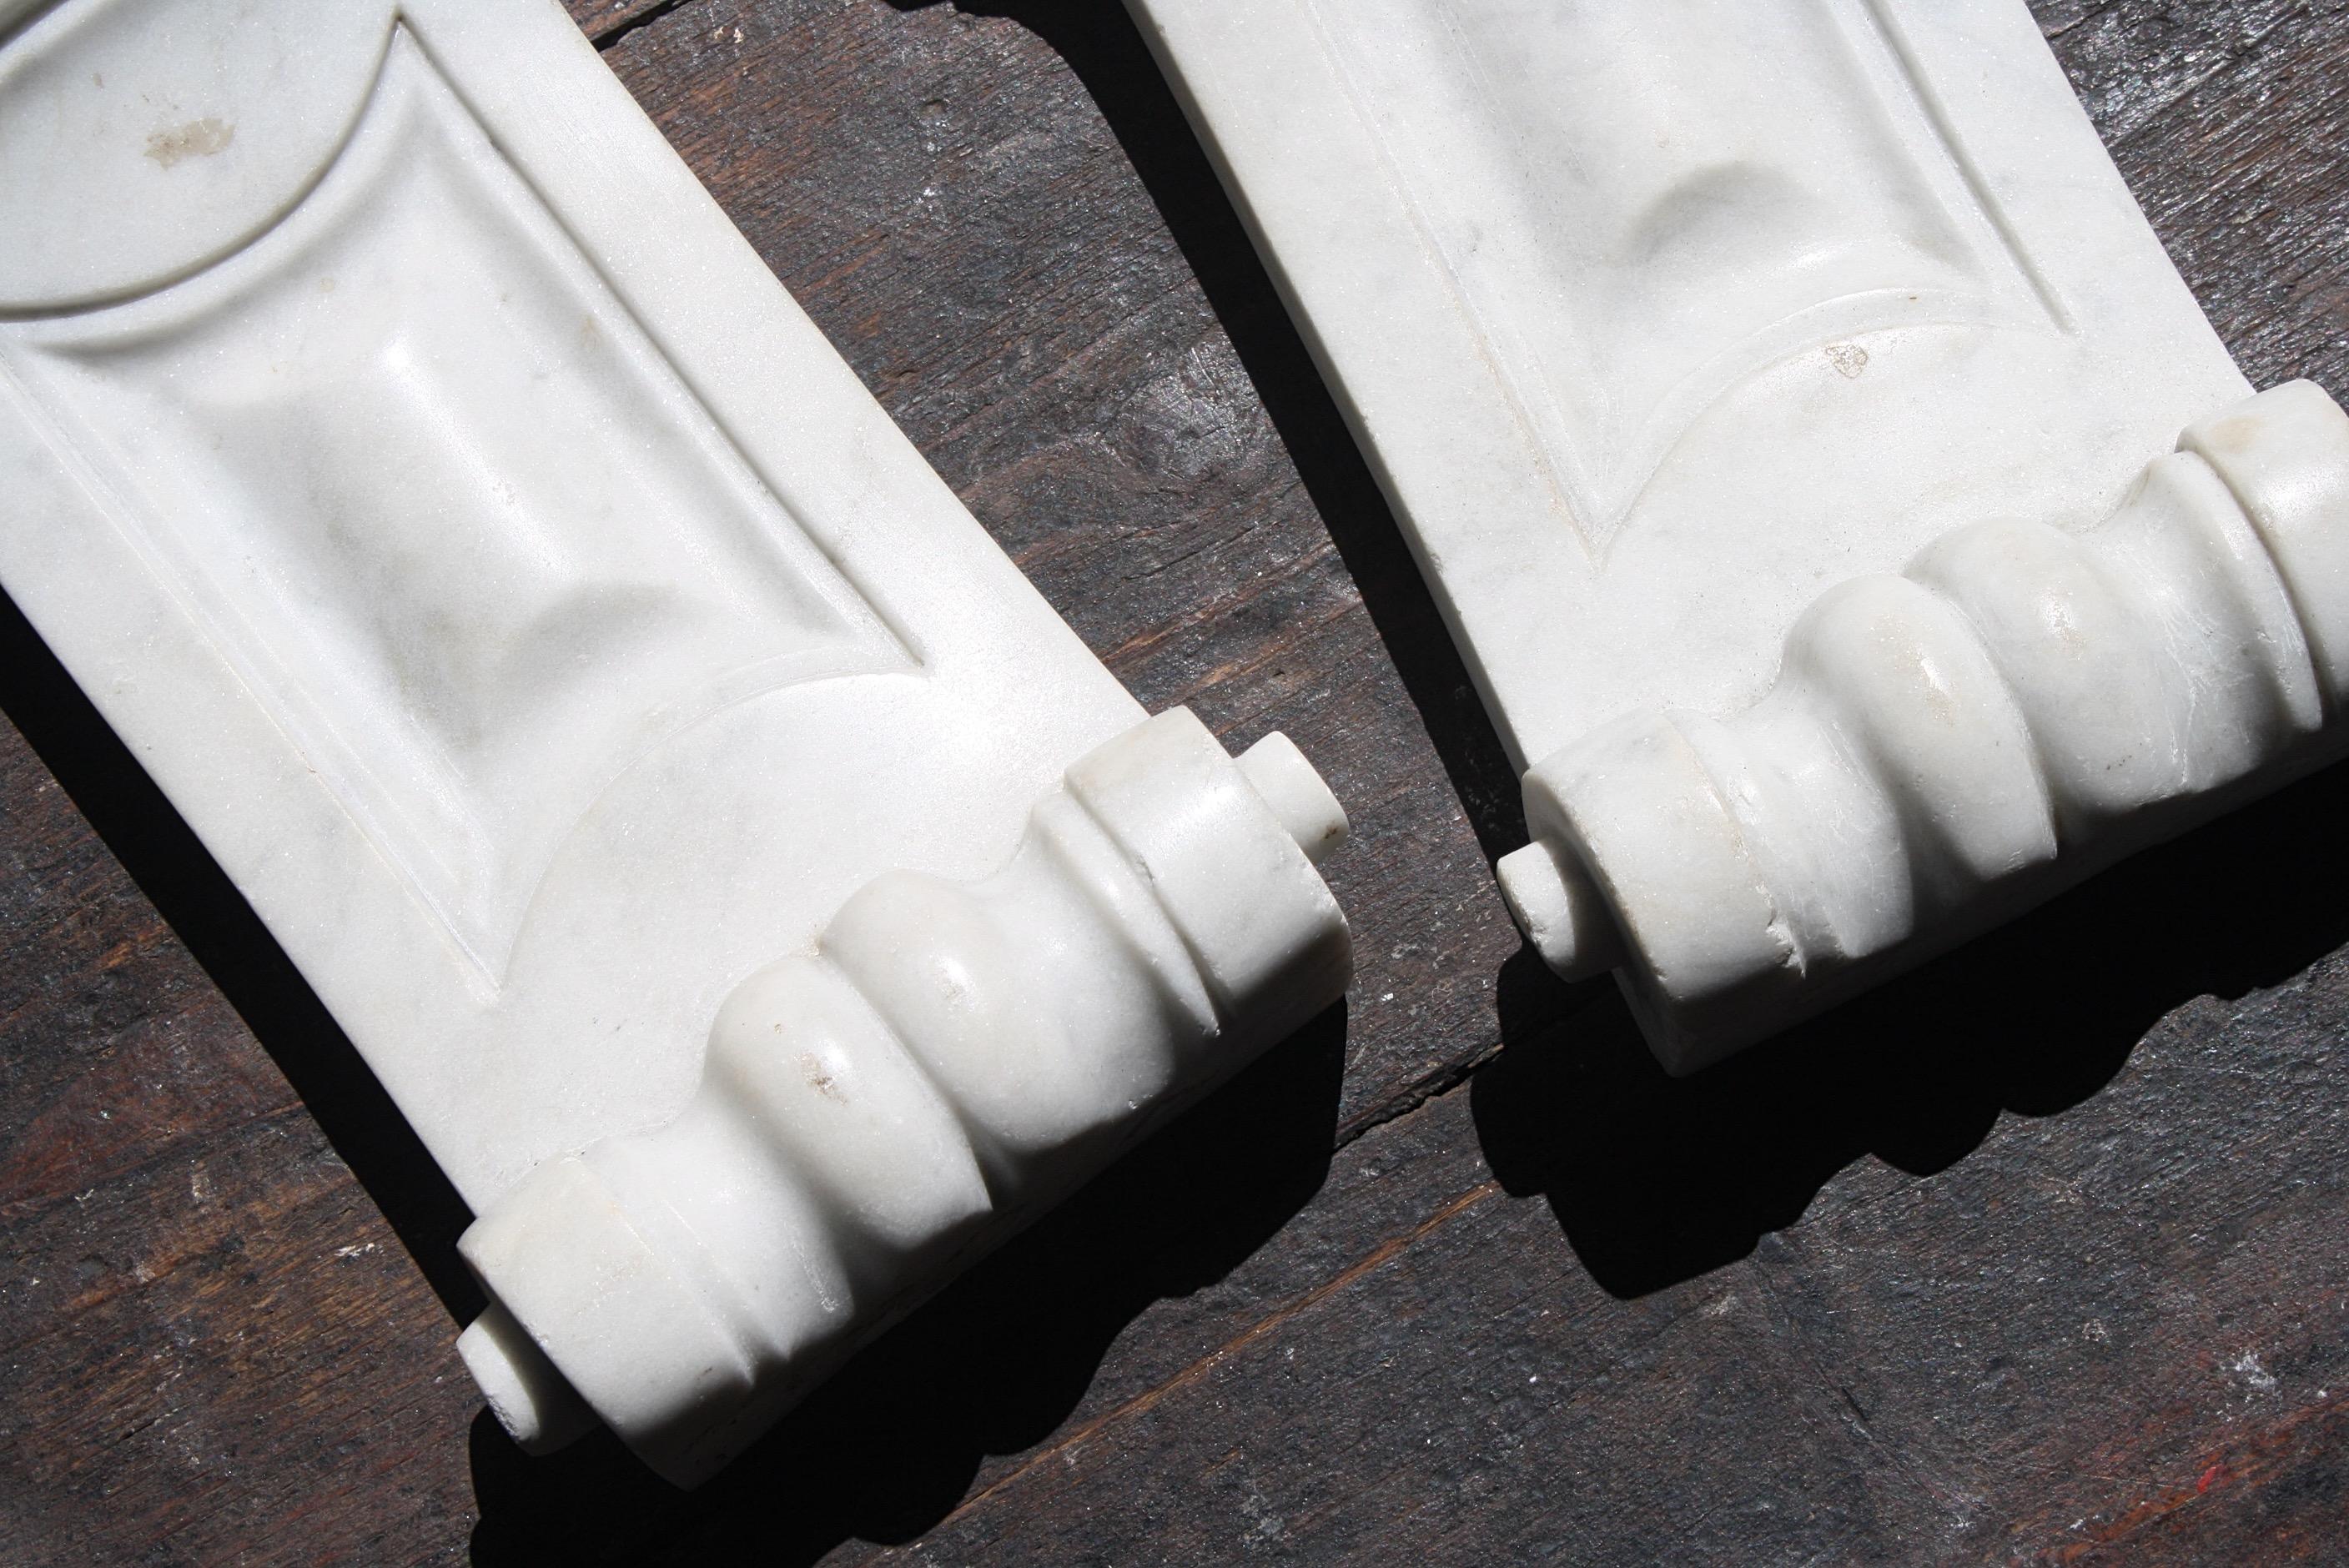 19th Century 19th C Pair of Carved Marble Corbels Decorative Architectural Elements Fireplace